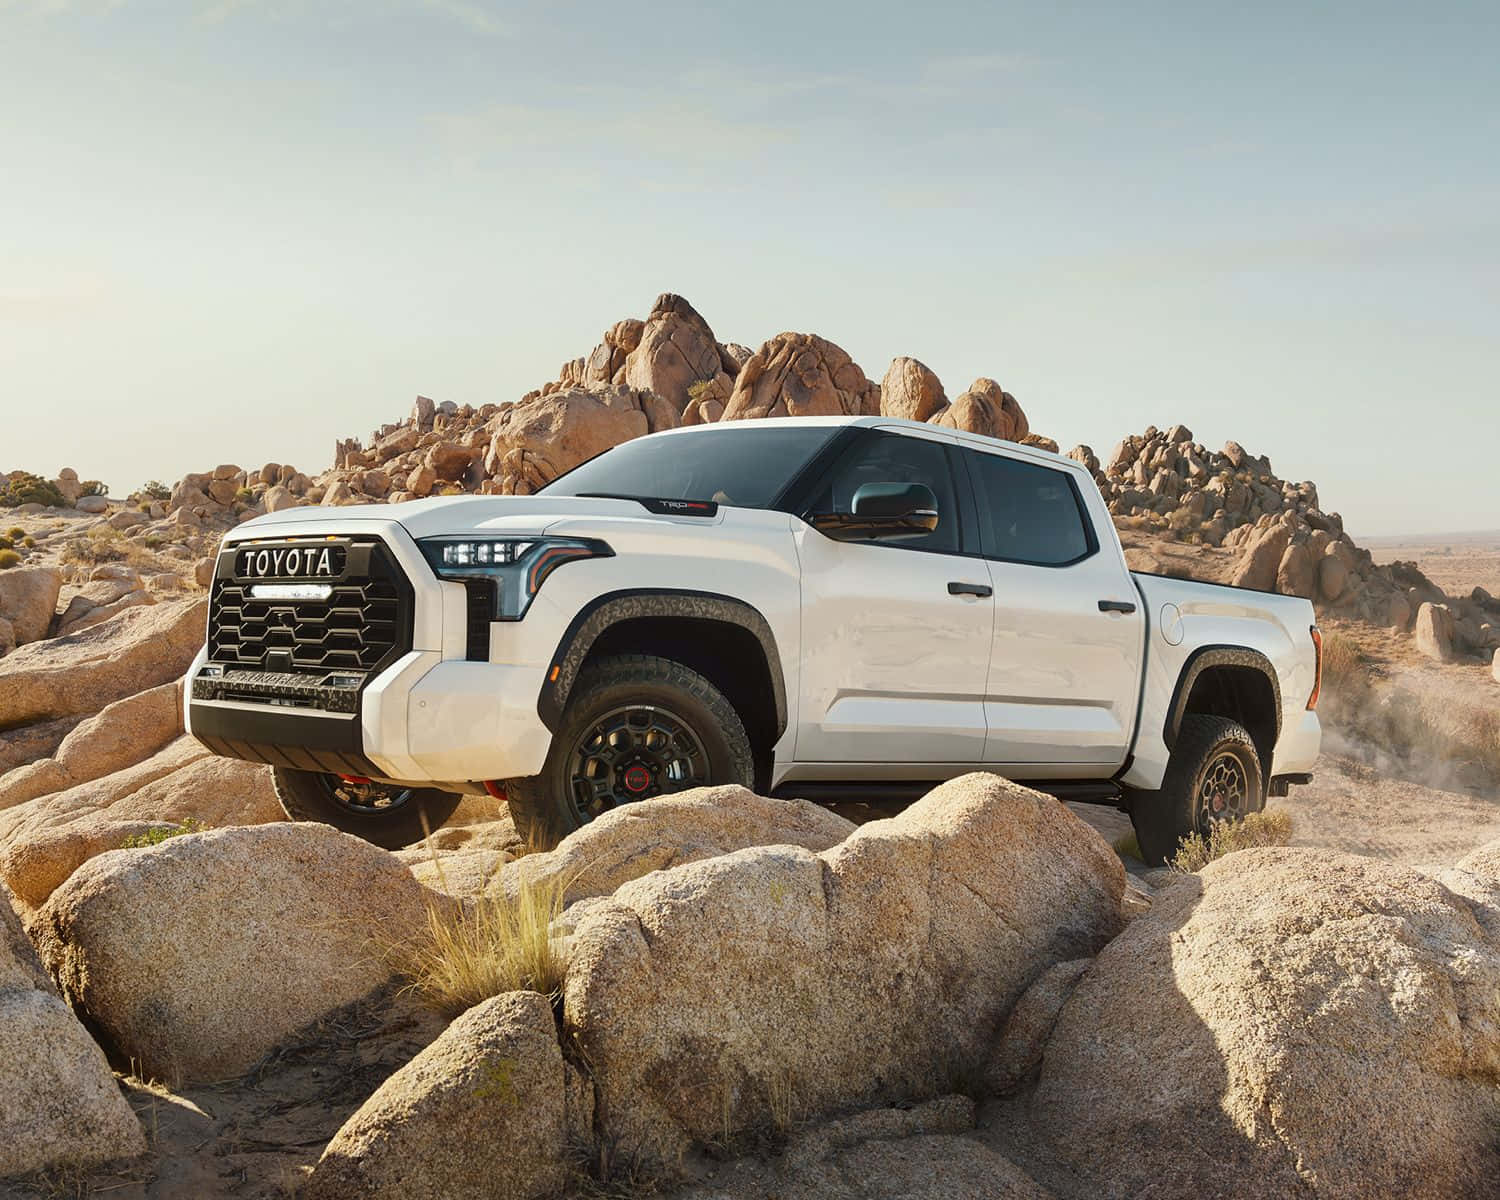 Thrill On The Road in The Toyota TRD Wallpaper